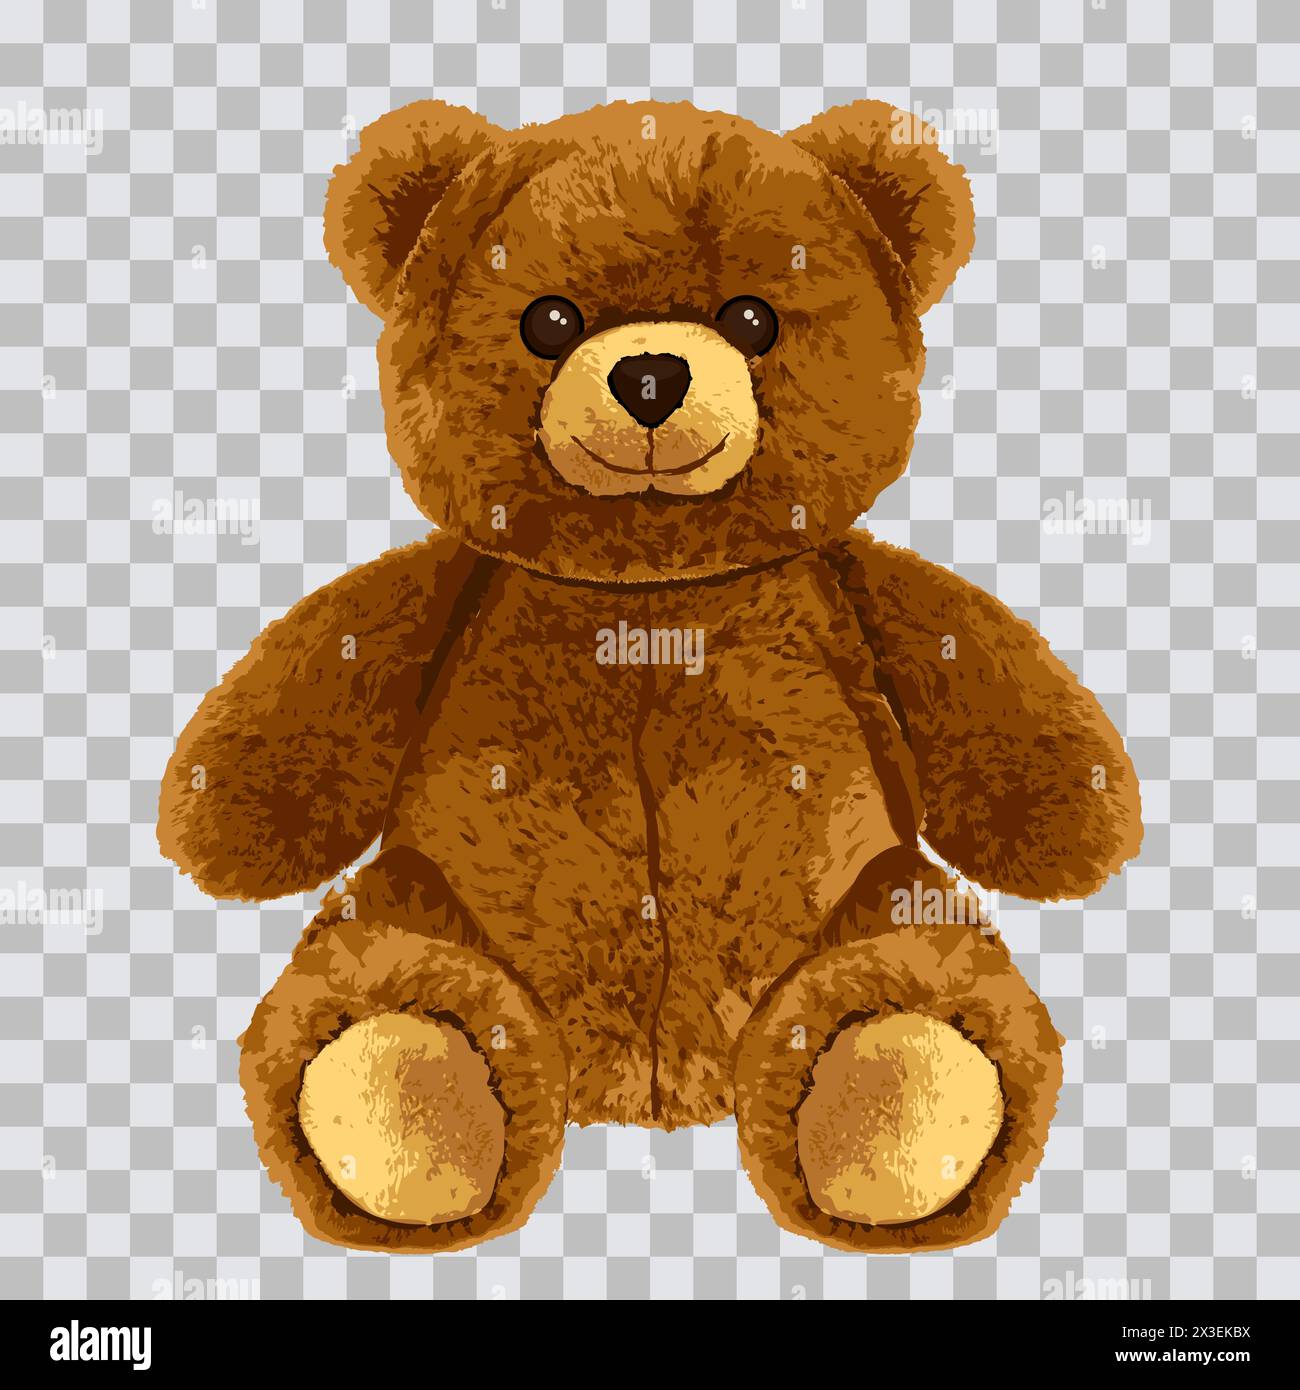 Bear toy realistic vector illustration isolated on transparent background. Cute teddy soft doll character. Fashion print or poster design element Stock Vector